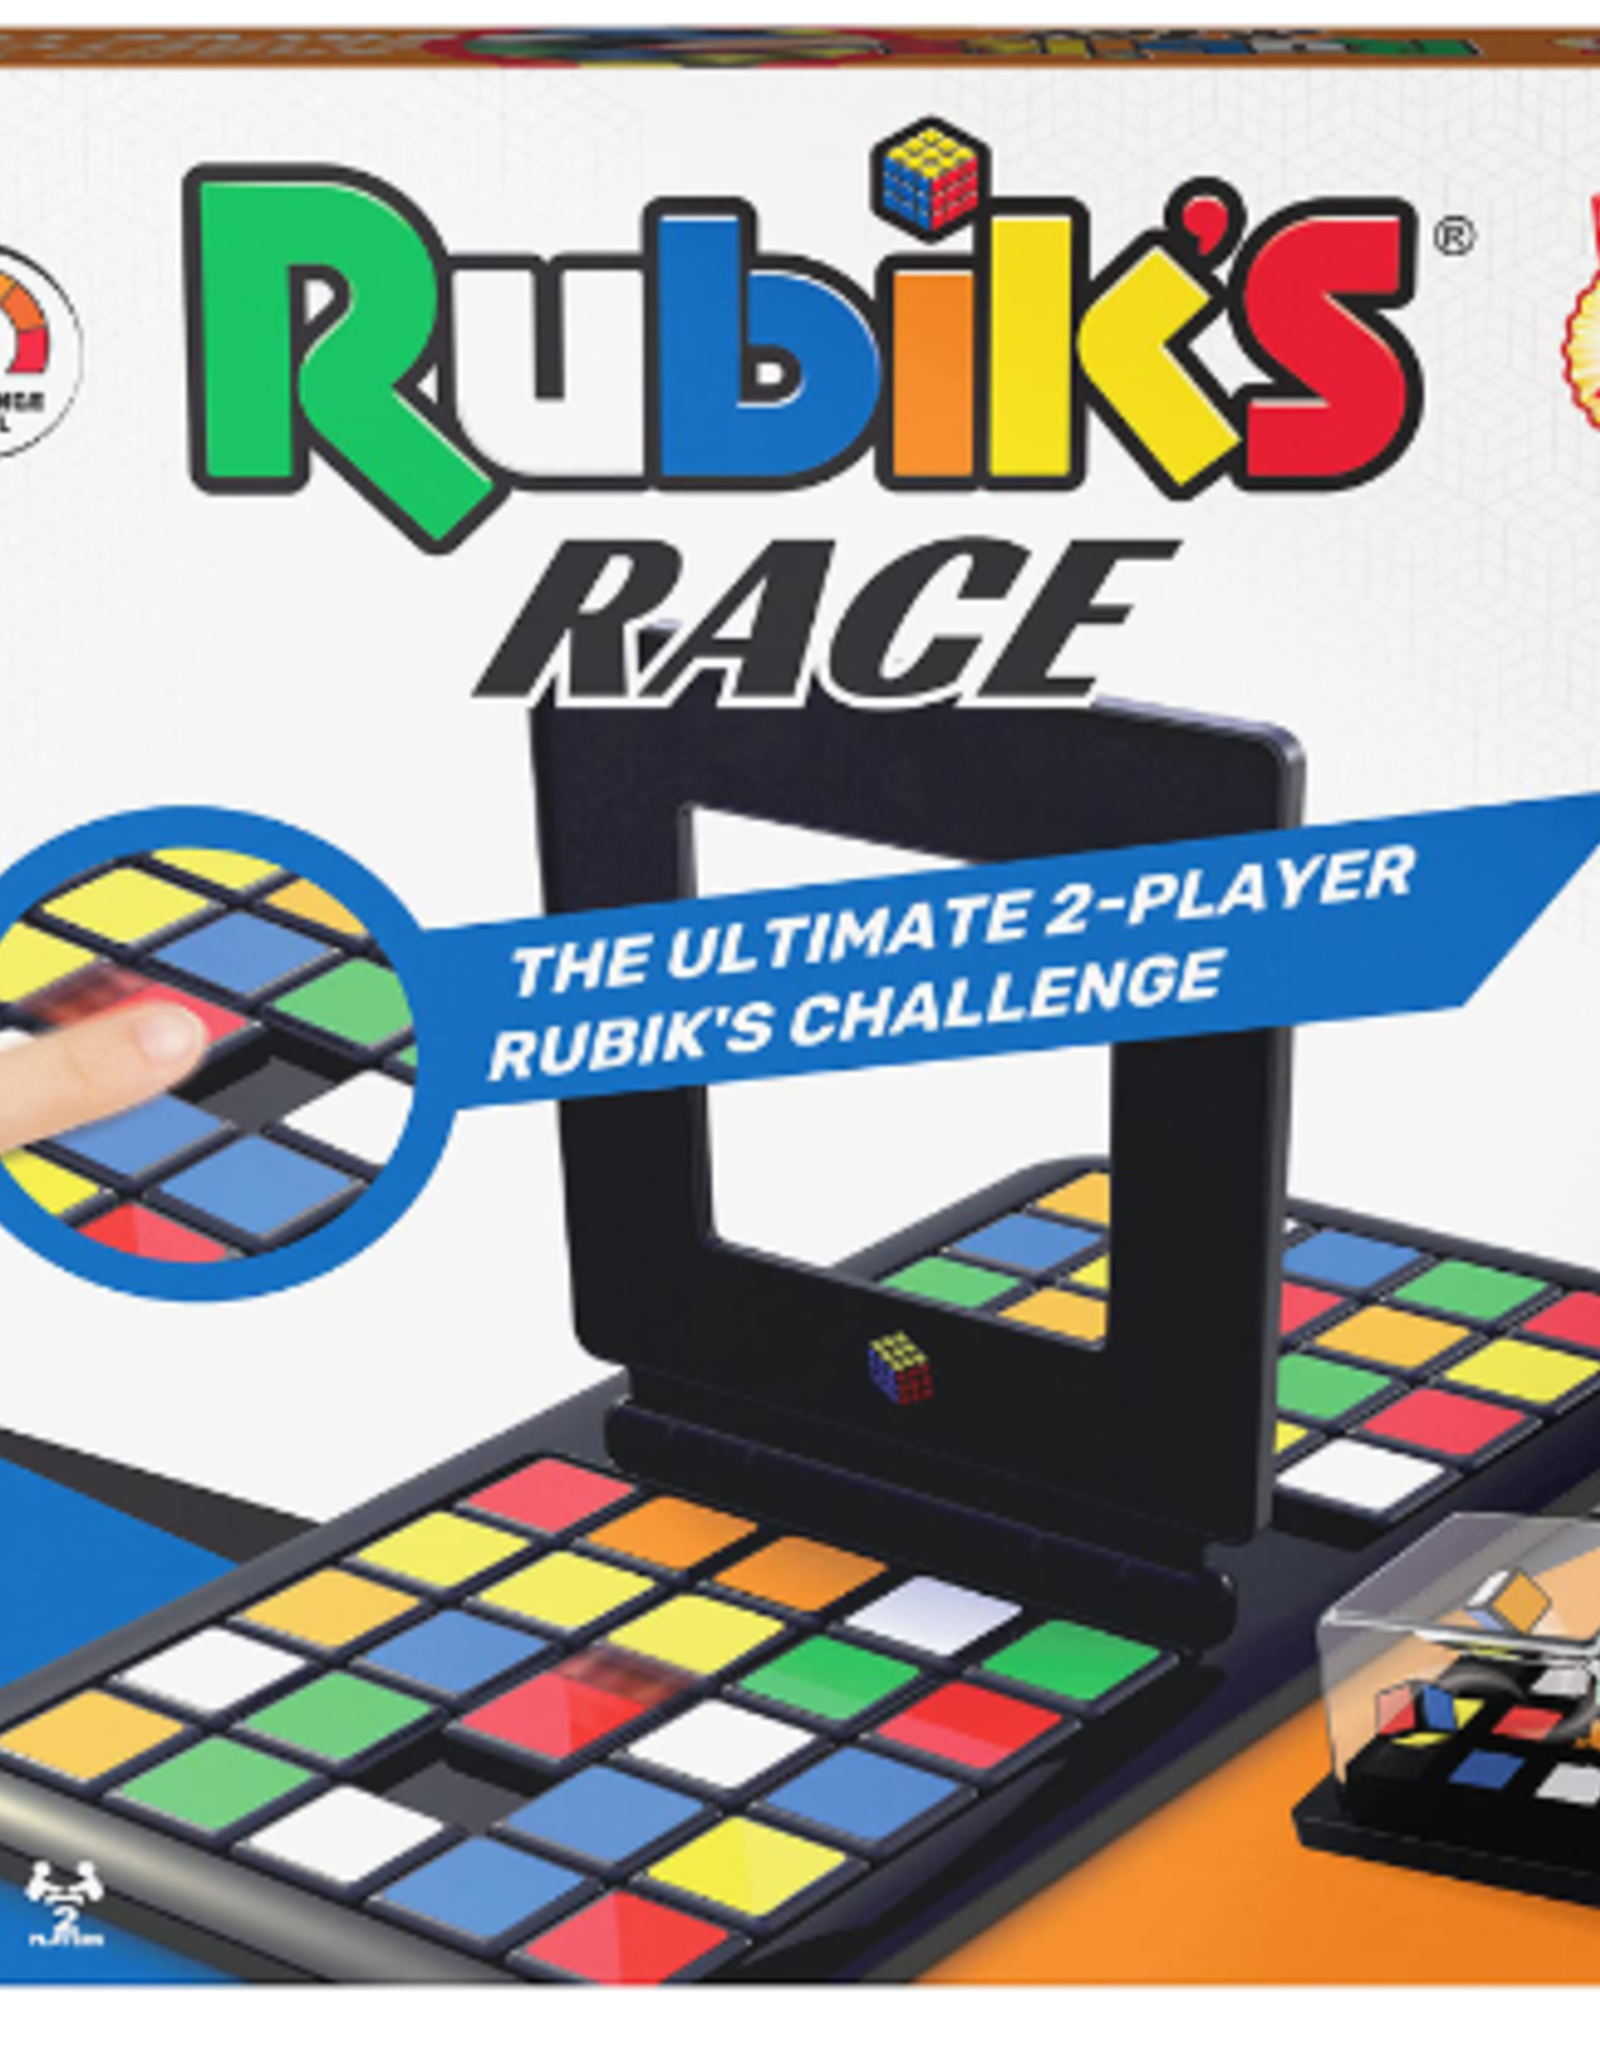 Rubik's Race and other puzzle challenges - The Board Game Family